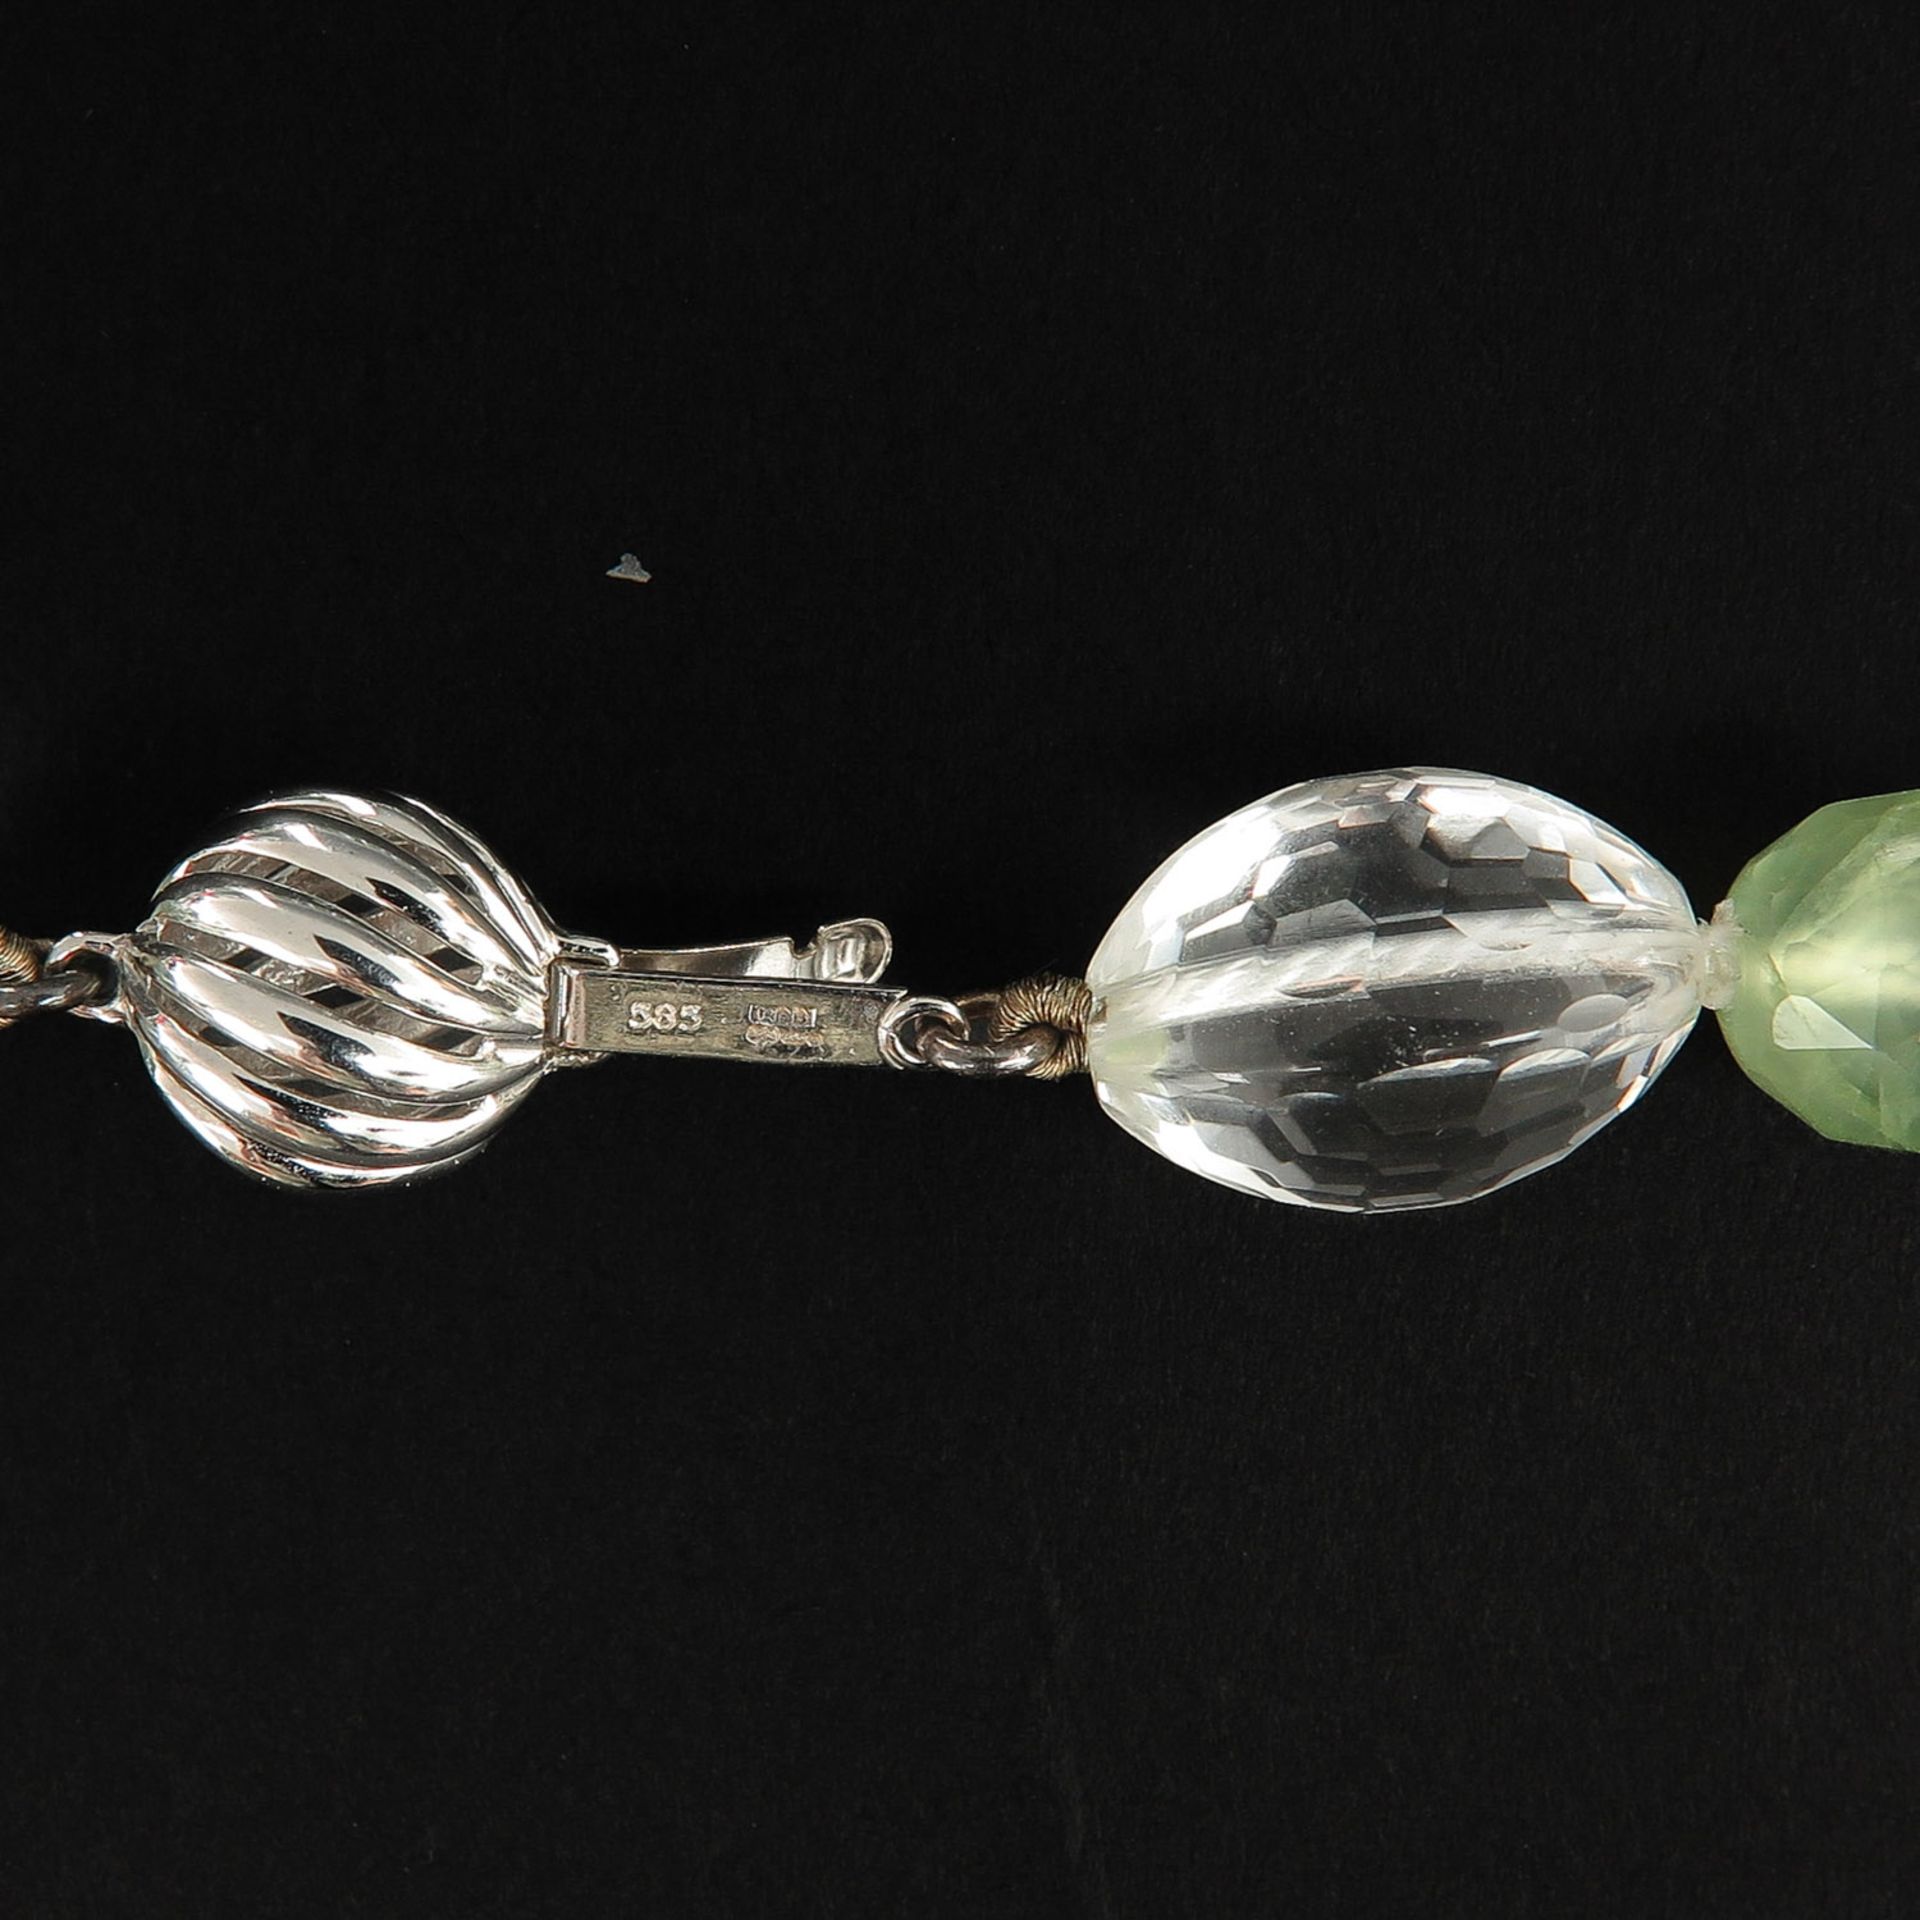 A Rock Crystal Necklace with 14KG Clasp - Image 5 of 6